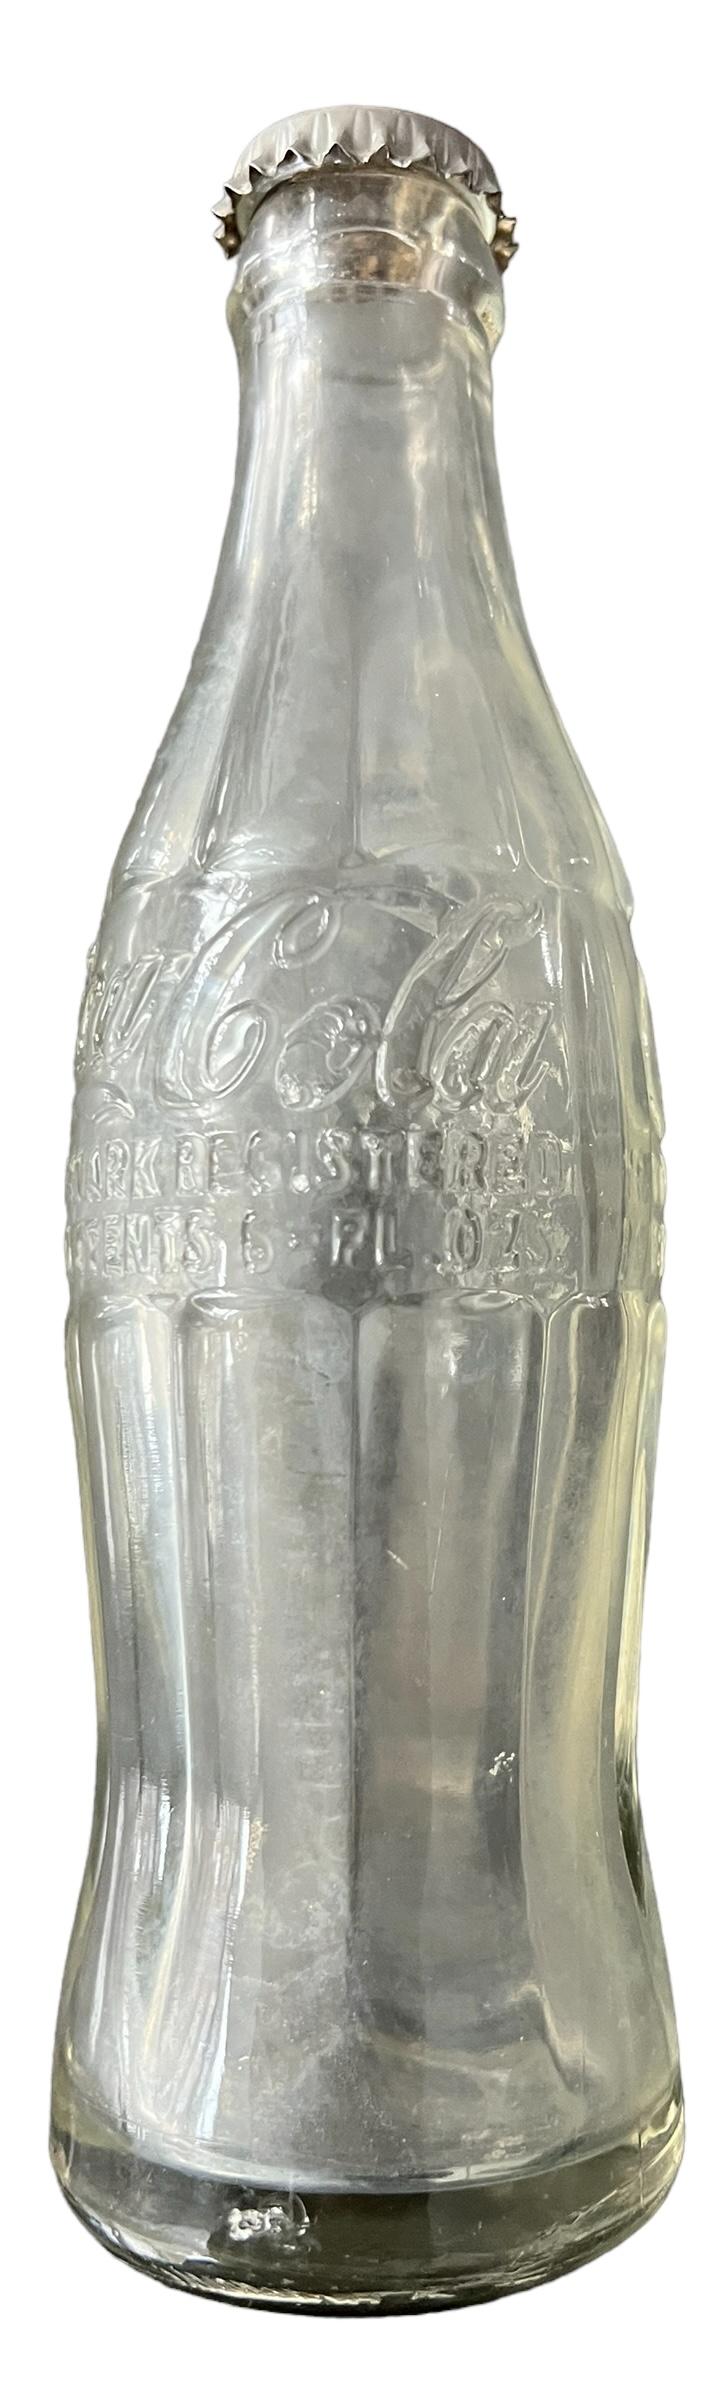 Coca Cola Bottle 1944 Dated & With Original Crown Cap - Nice Used Condition